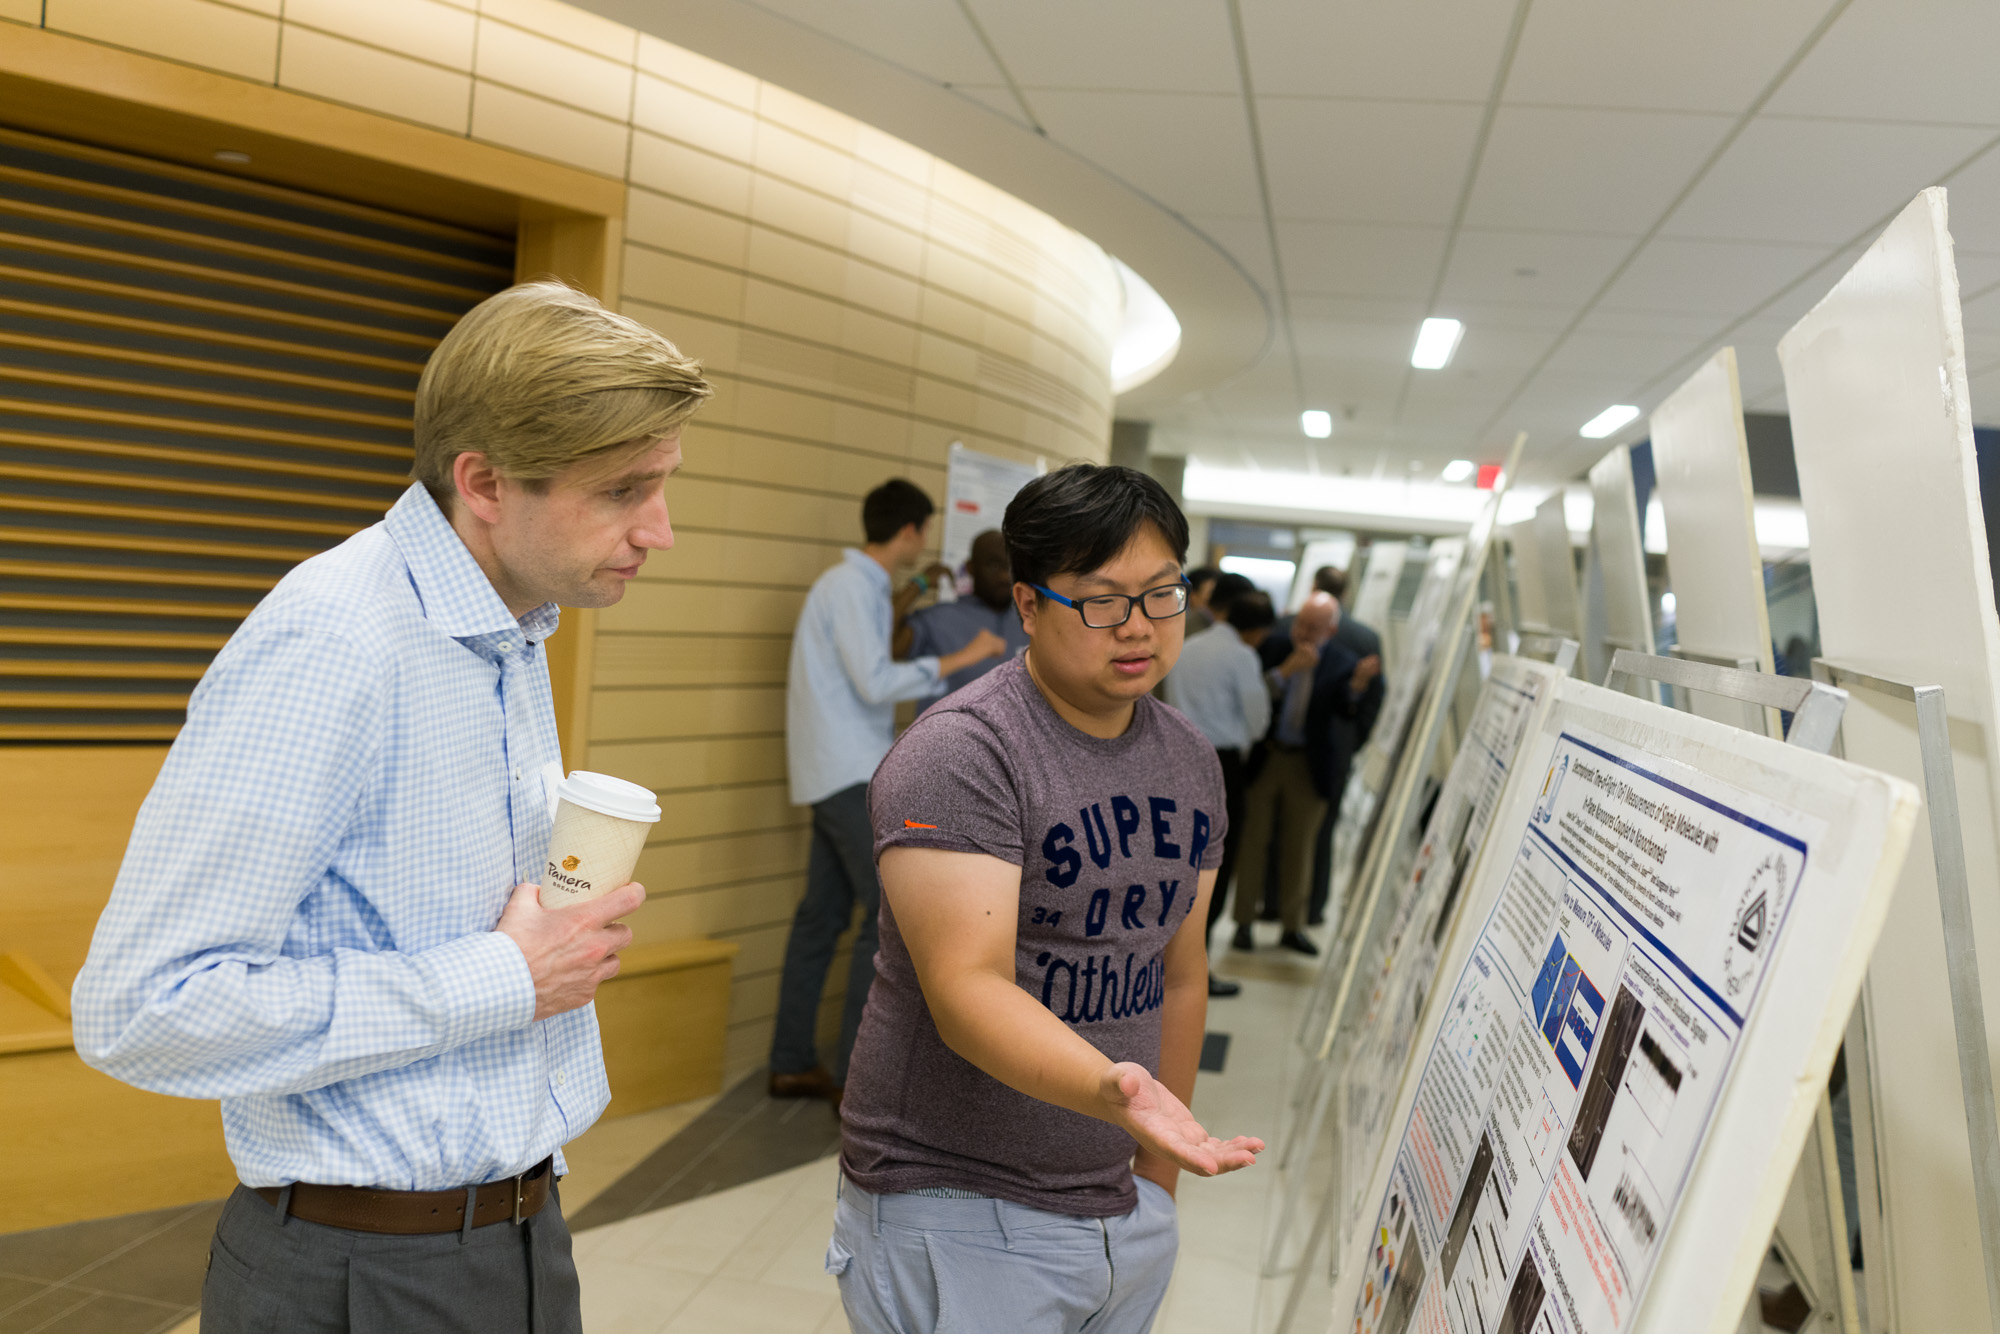 Two men discuss a scientific poster at a conference, with one holding a coffee cup and the other explaining with a hand gesture.